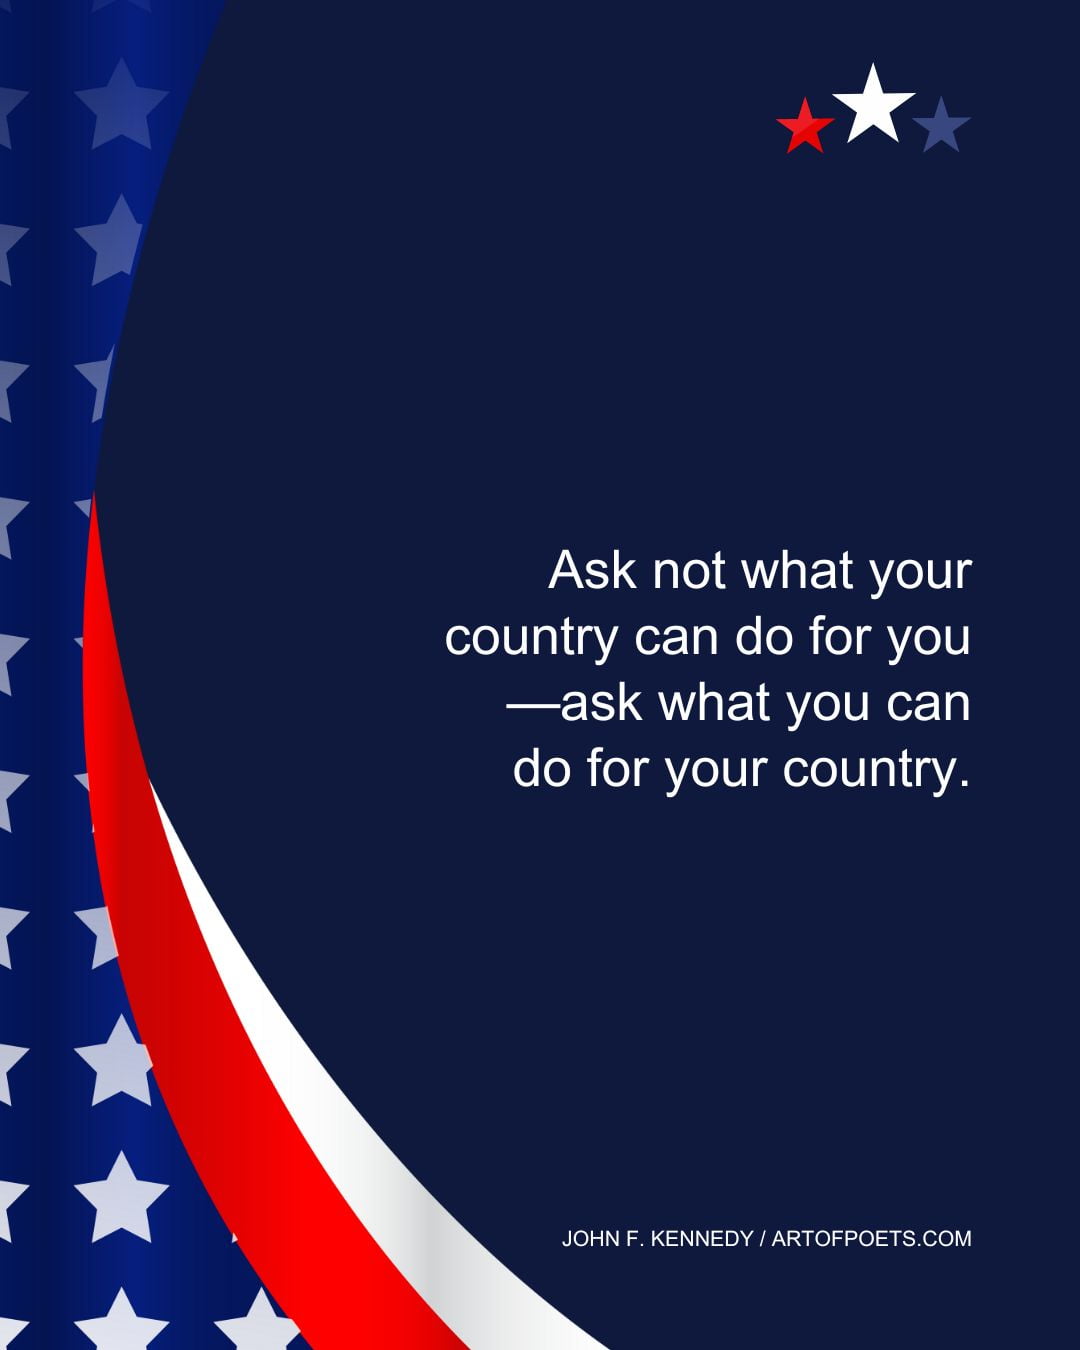 Ask not what your country can do for you—ask what you can do for your country